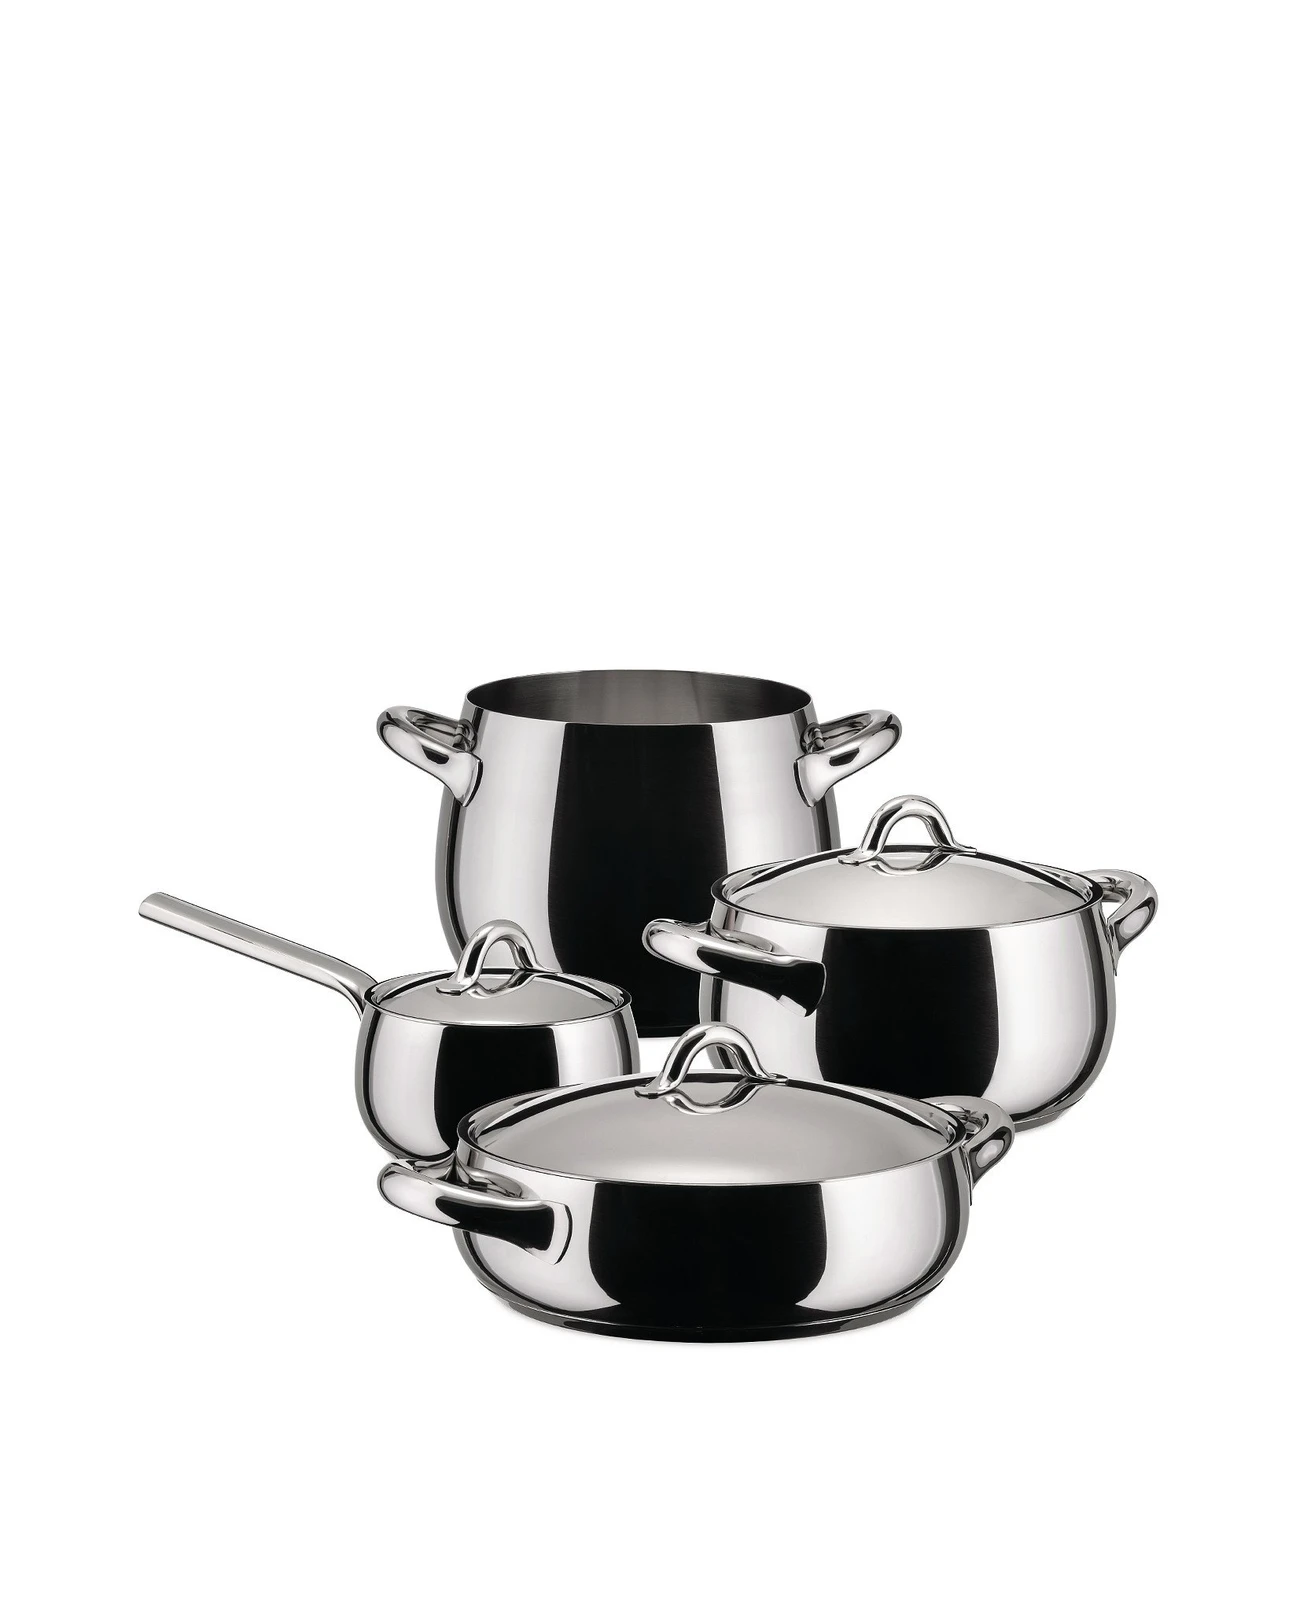 https://locatellihousestore.it/cdn/shop/products/SG100-7_Alessi_Mami_Set7_Pentole_Acciaio_Inox_Argento_1_1296x1622.png?v=1625760193